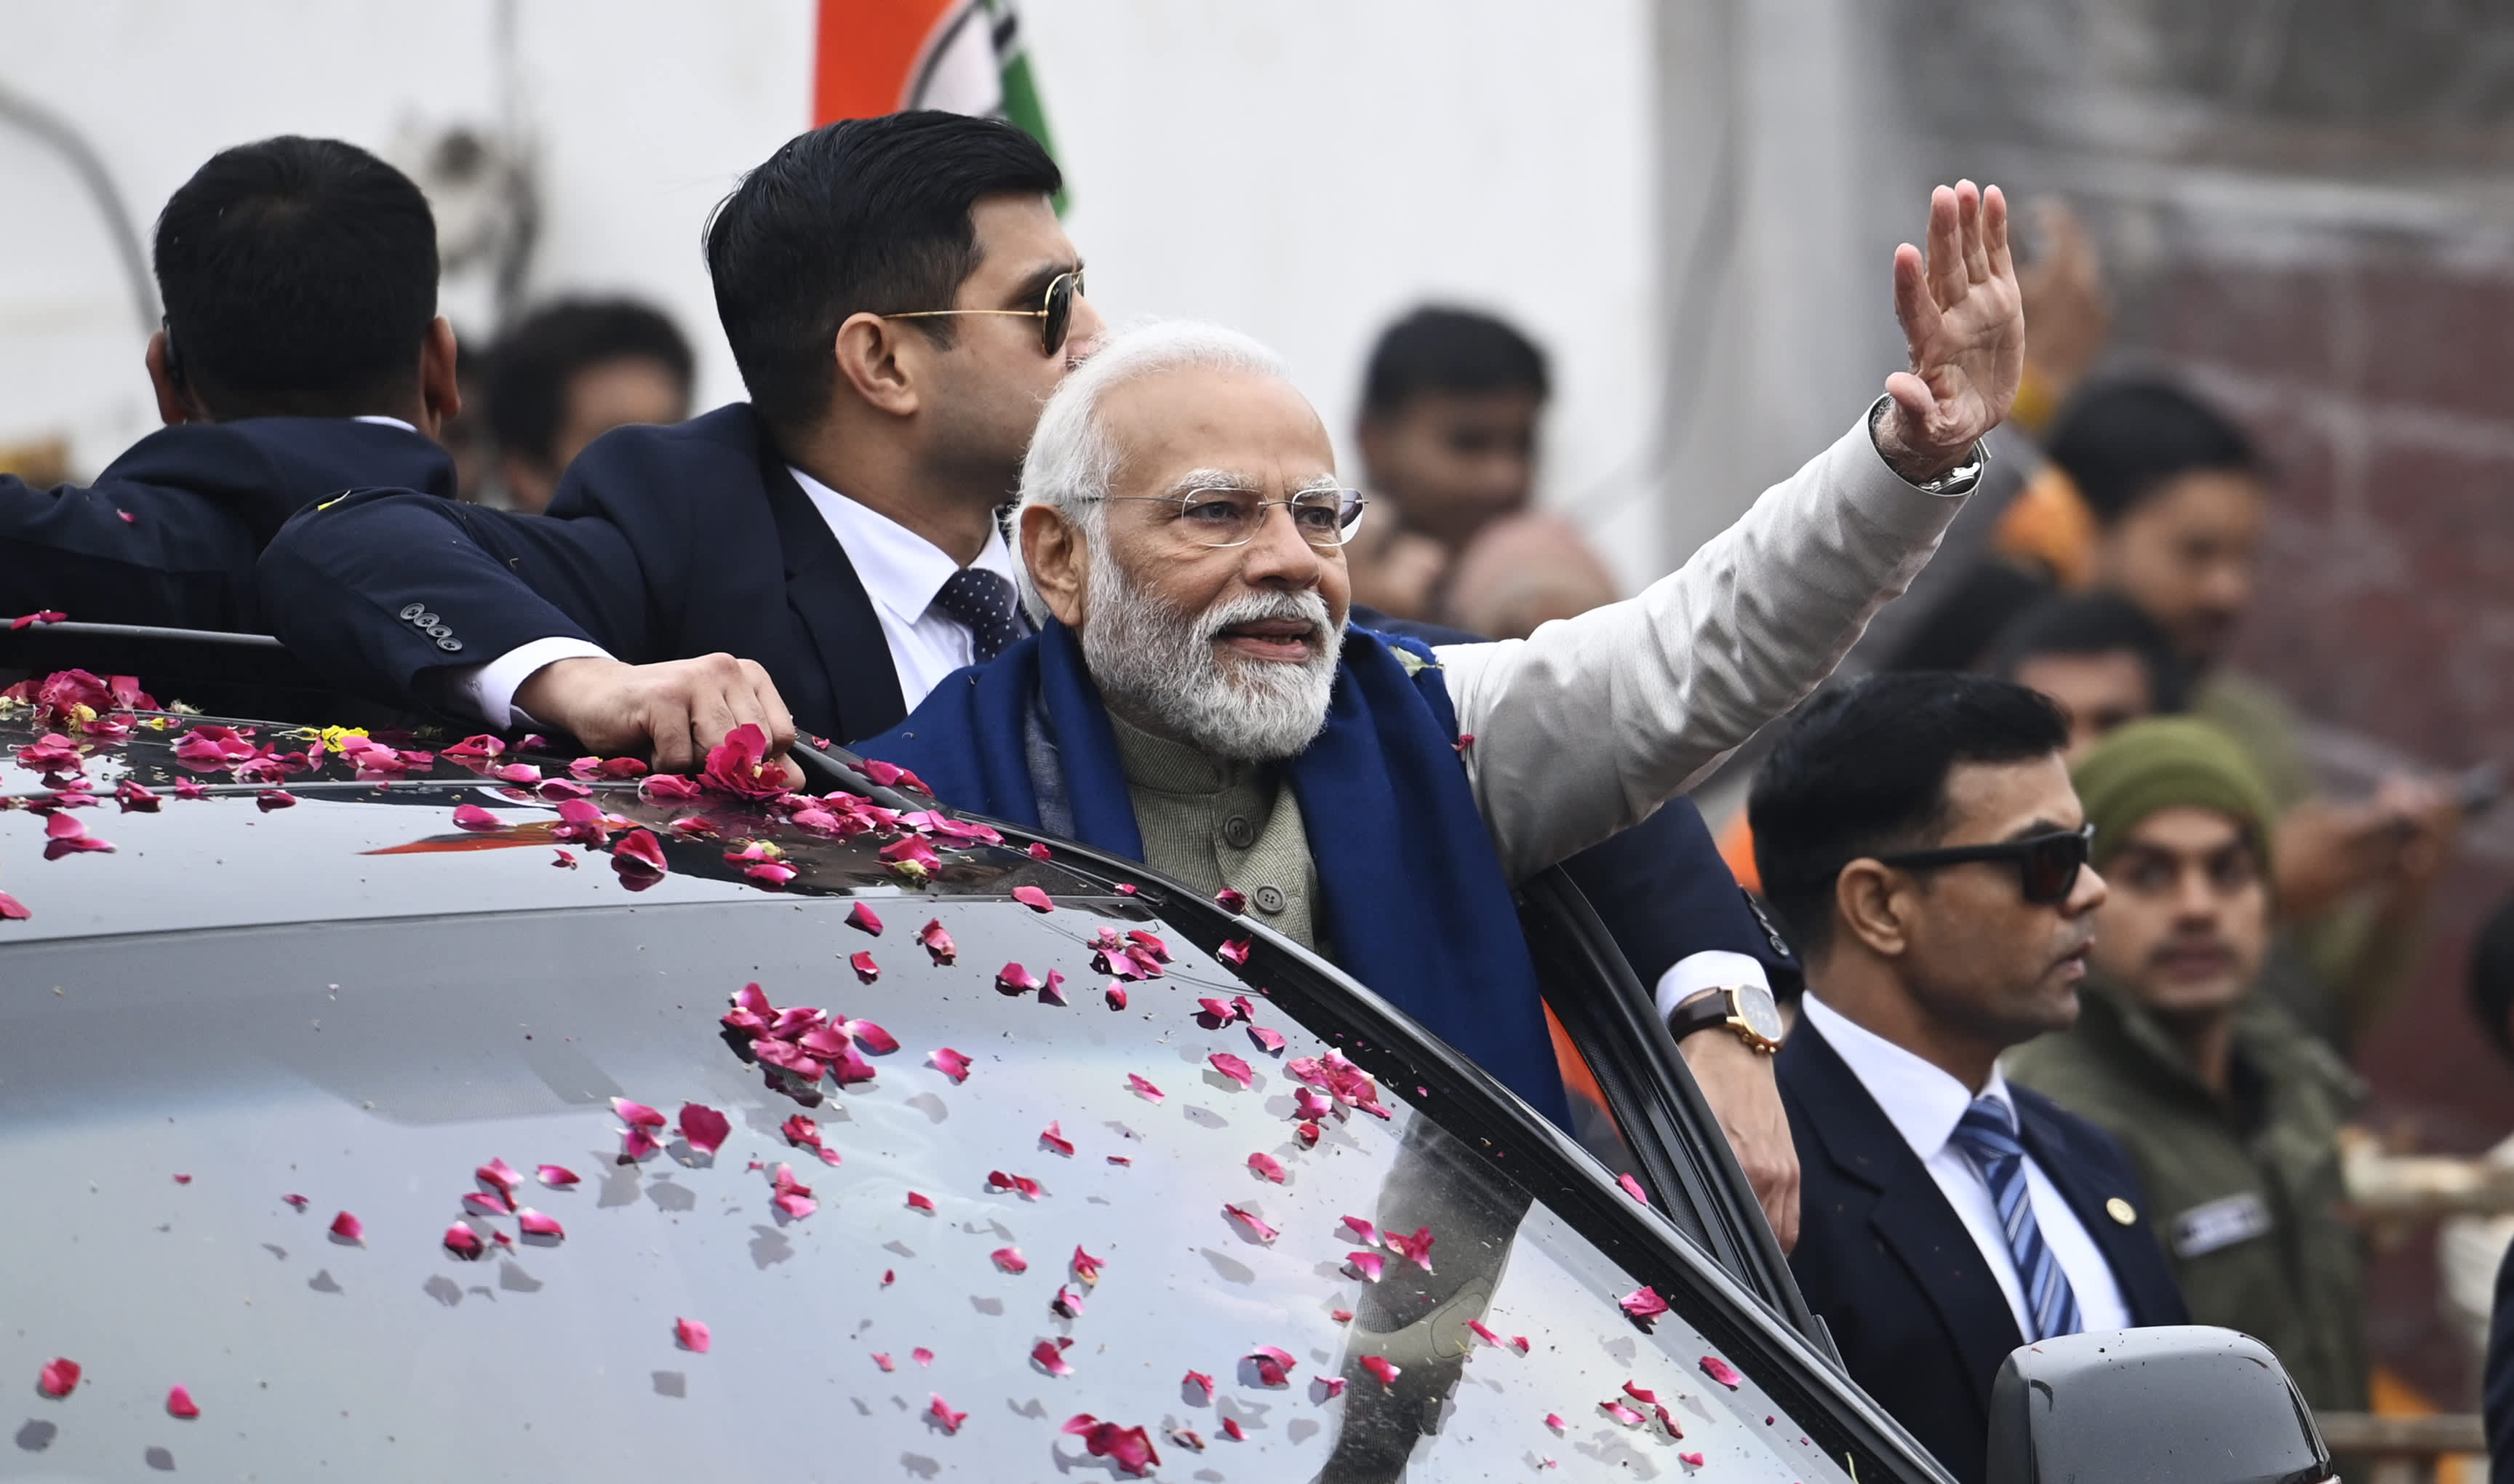 India expects economic growth of 7.3%, which boosts Modi's chances in the elections